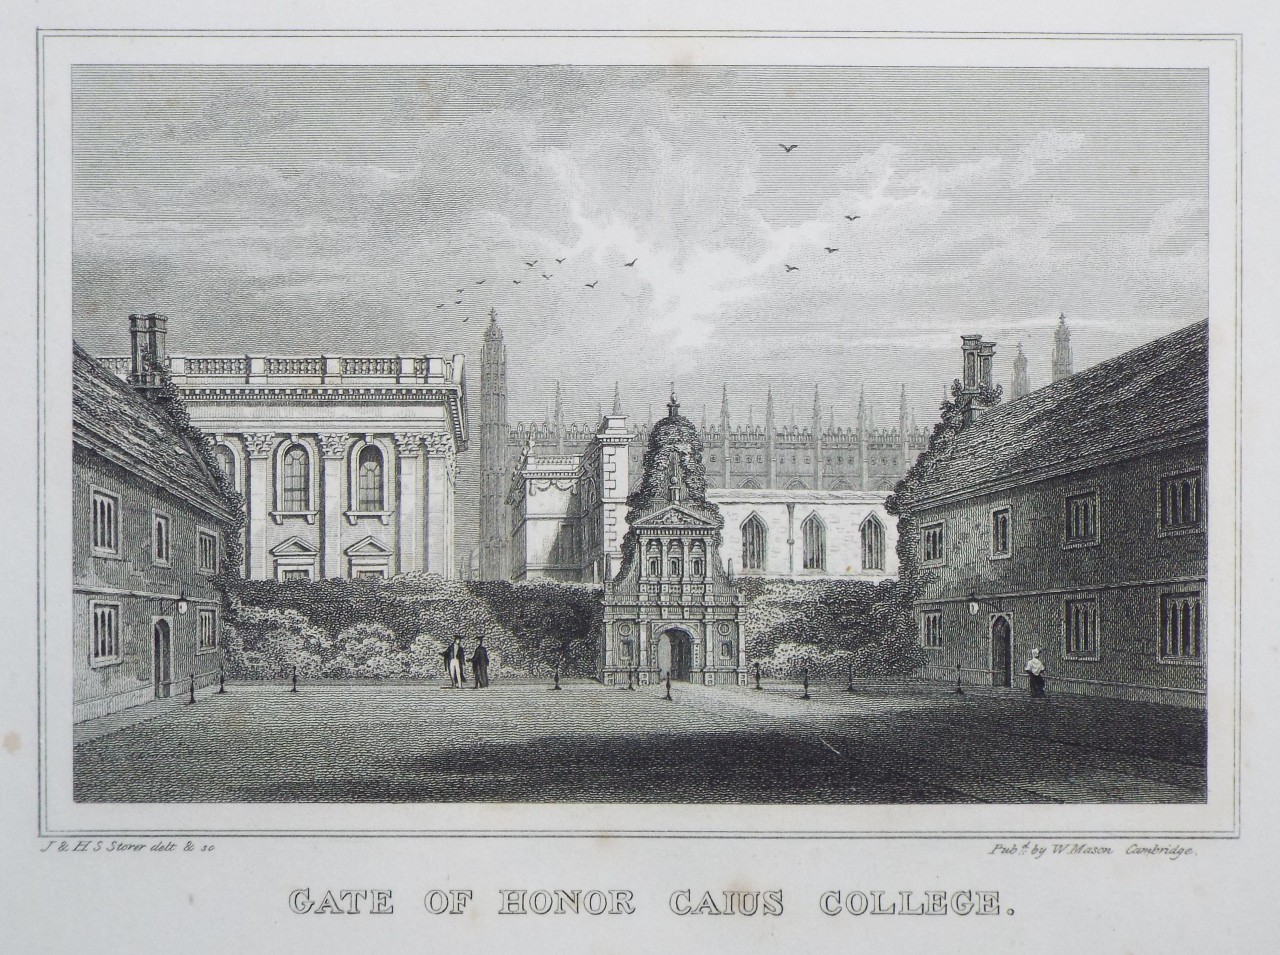 Print - Gate of Honor Caius College. - Storer